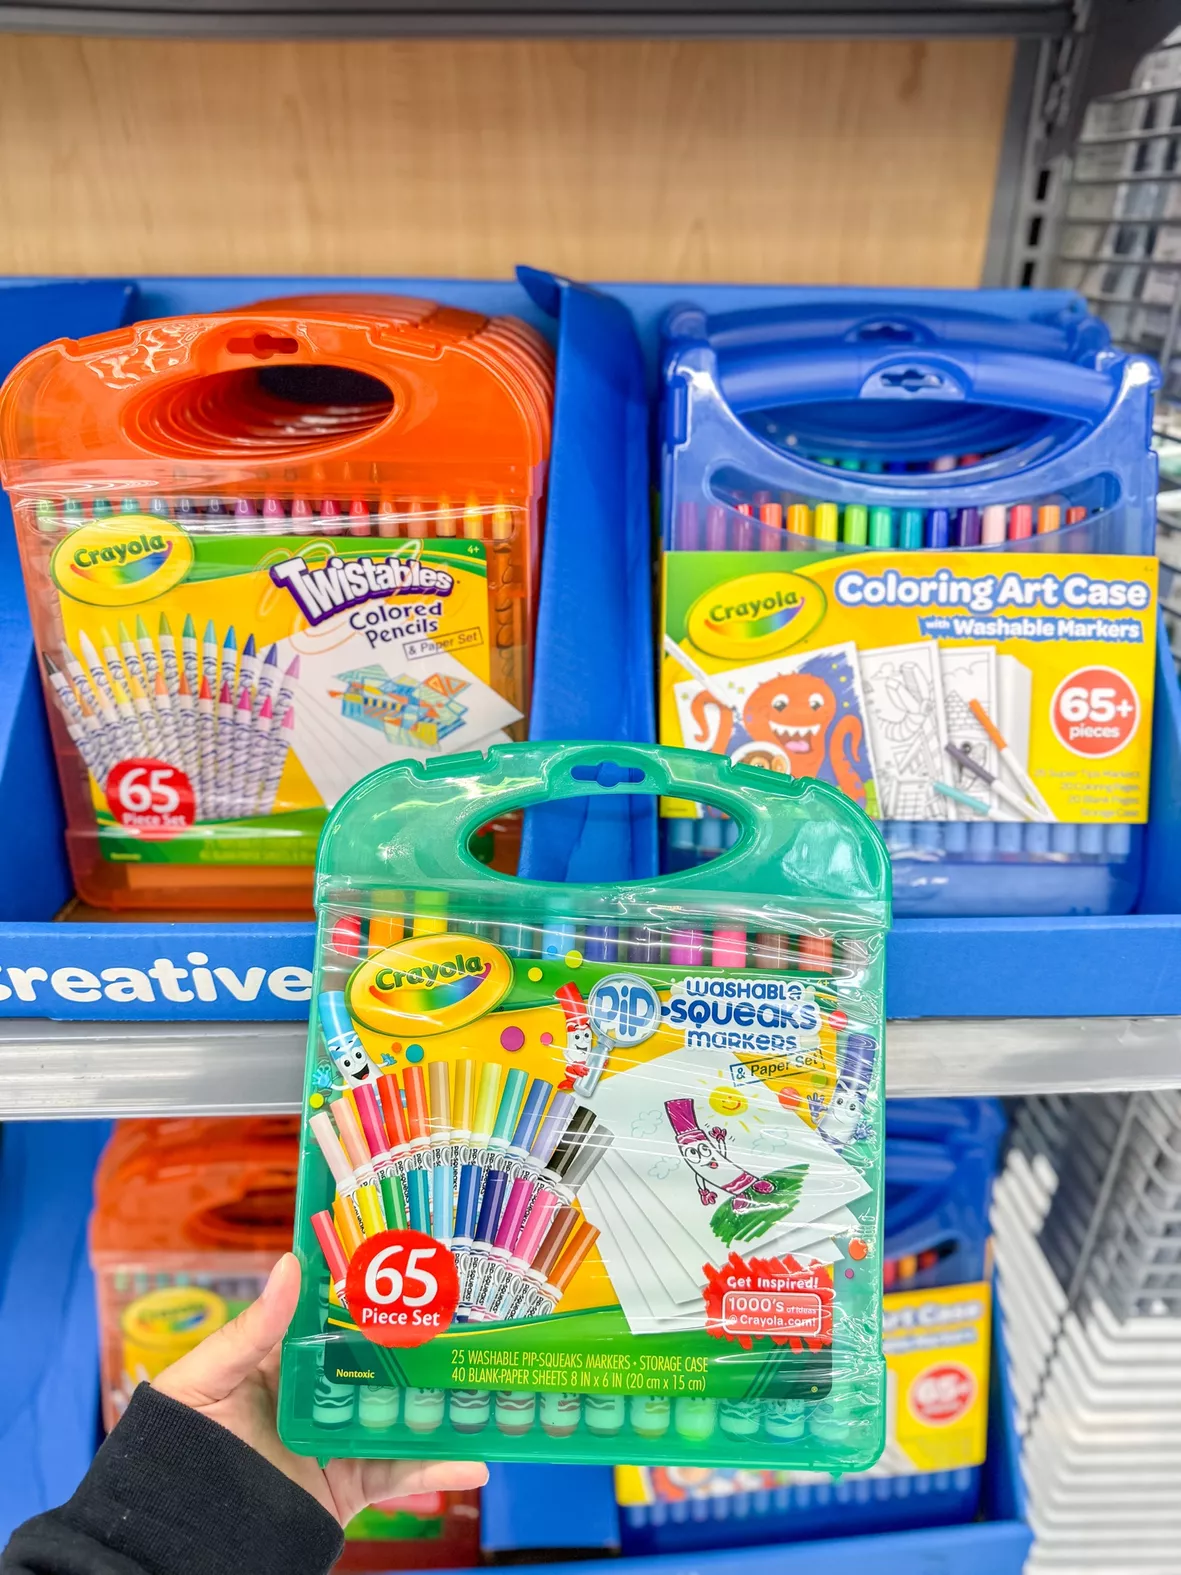 Crayola Pip-Squeaks Washable Markers & Paper Set, Kids Travel